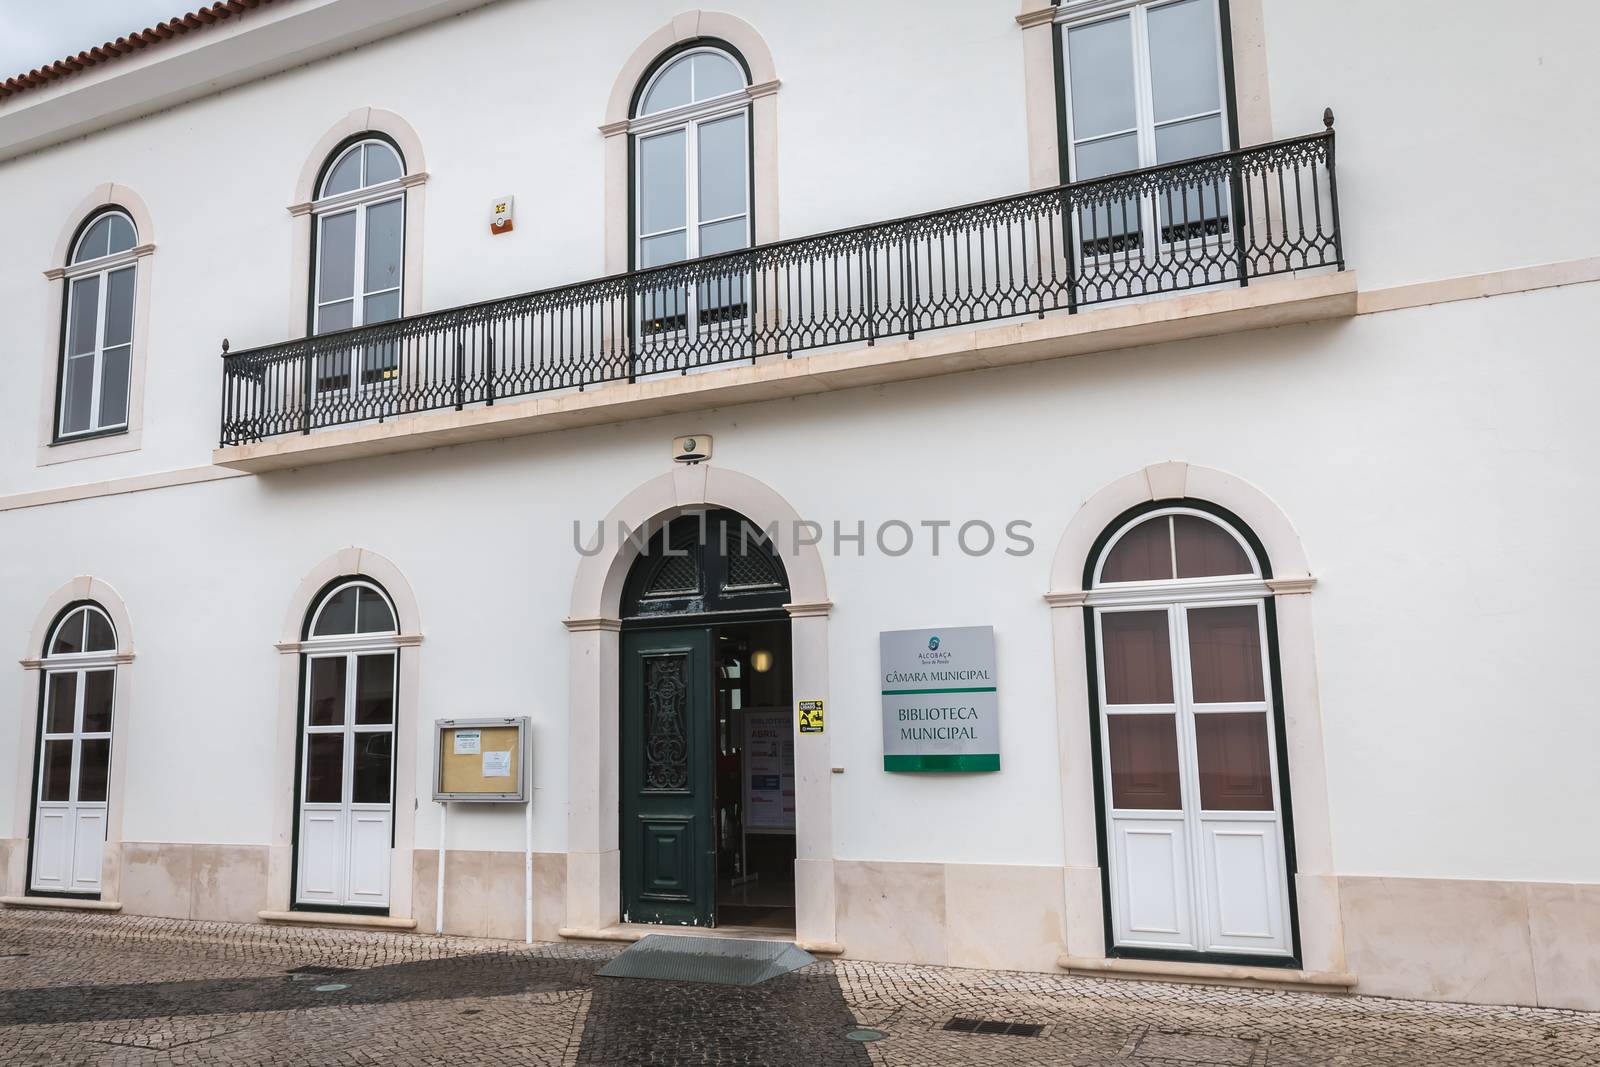 Alcobaca, Portugal - April 13, 2019: architectural detail of the city center municipal library on a spring day